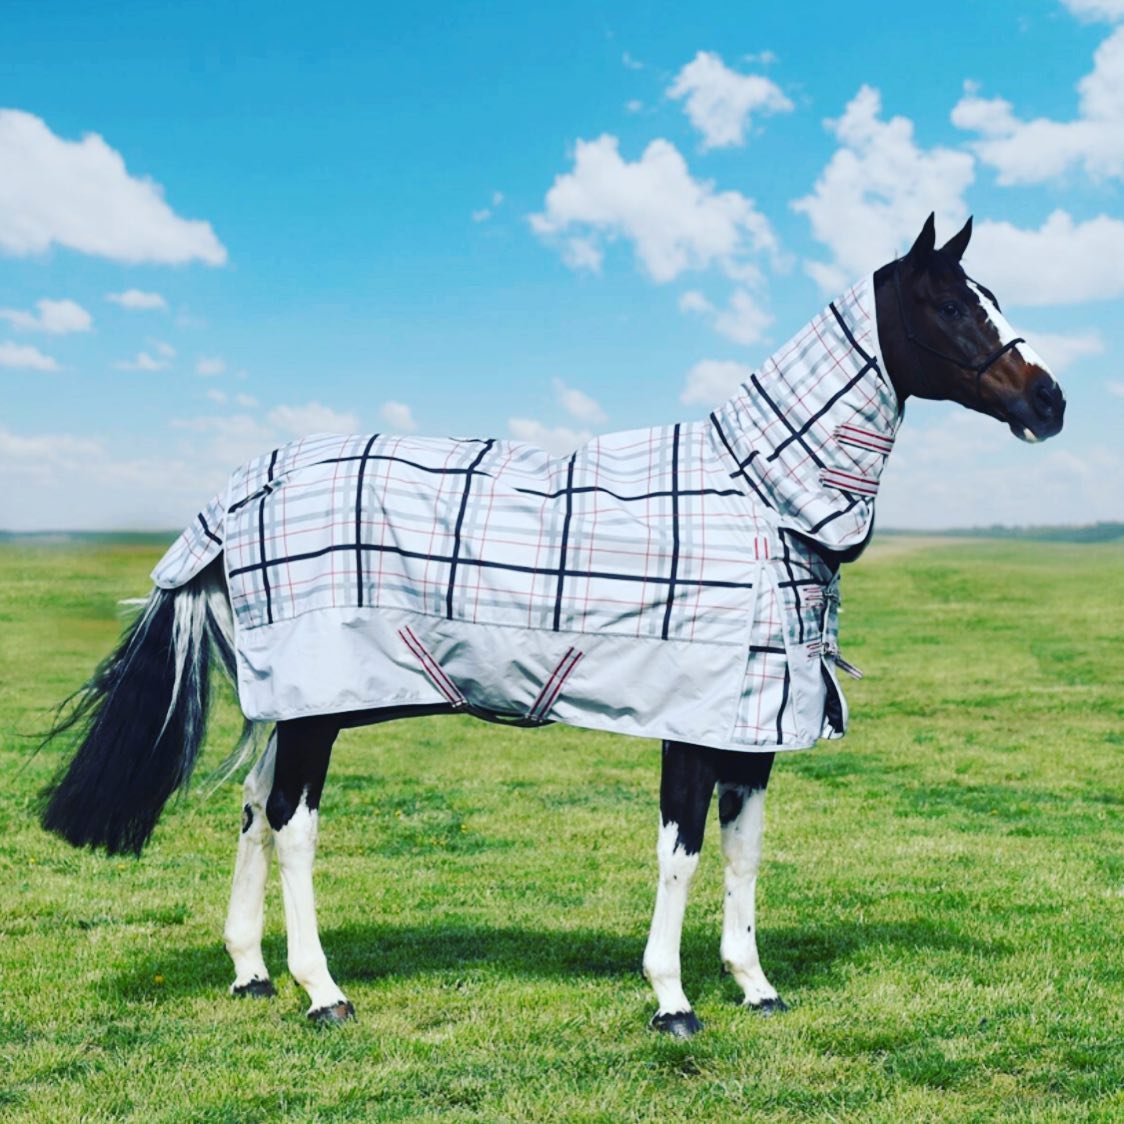 Can You Put A Rug On A Wet Horse?